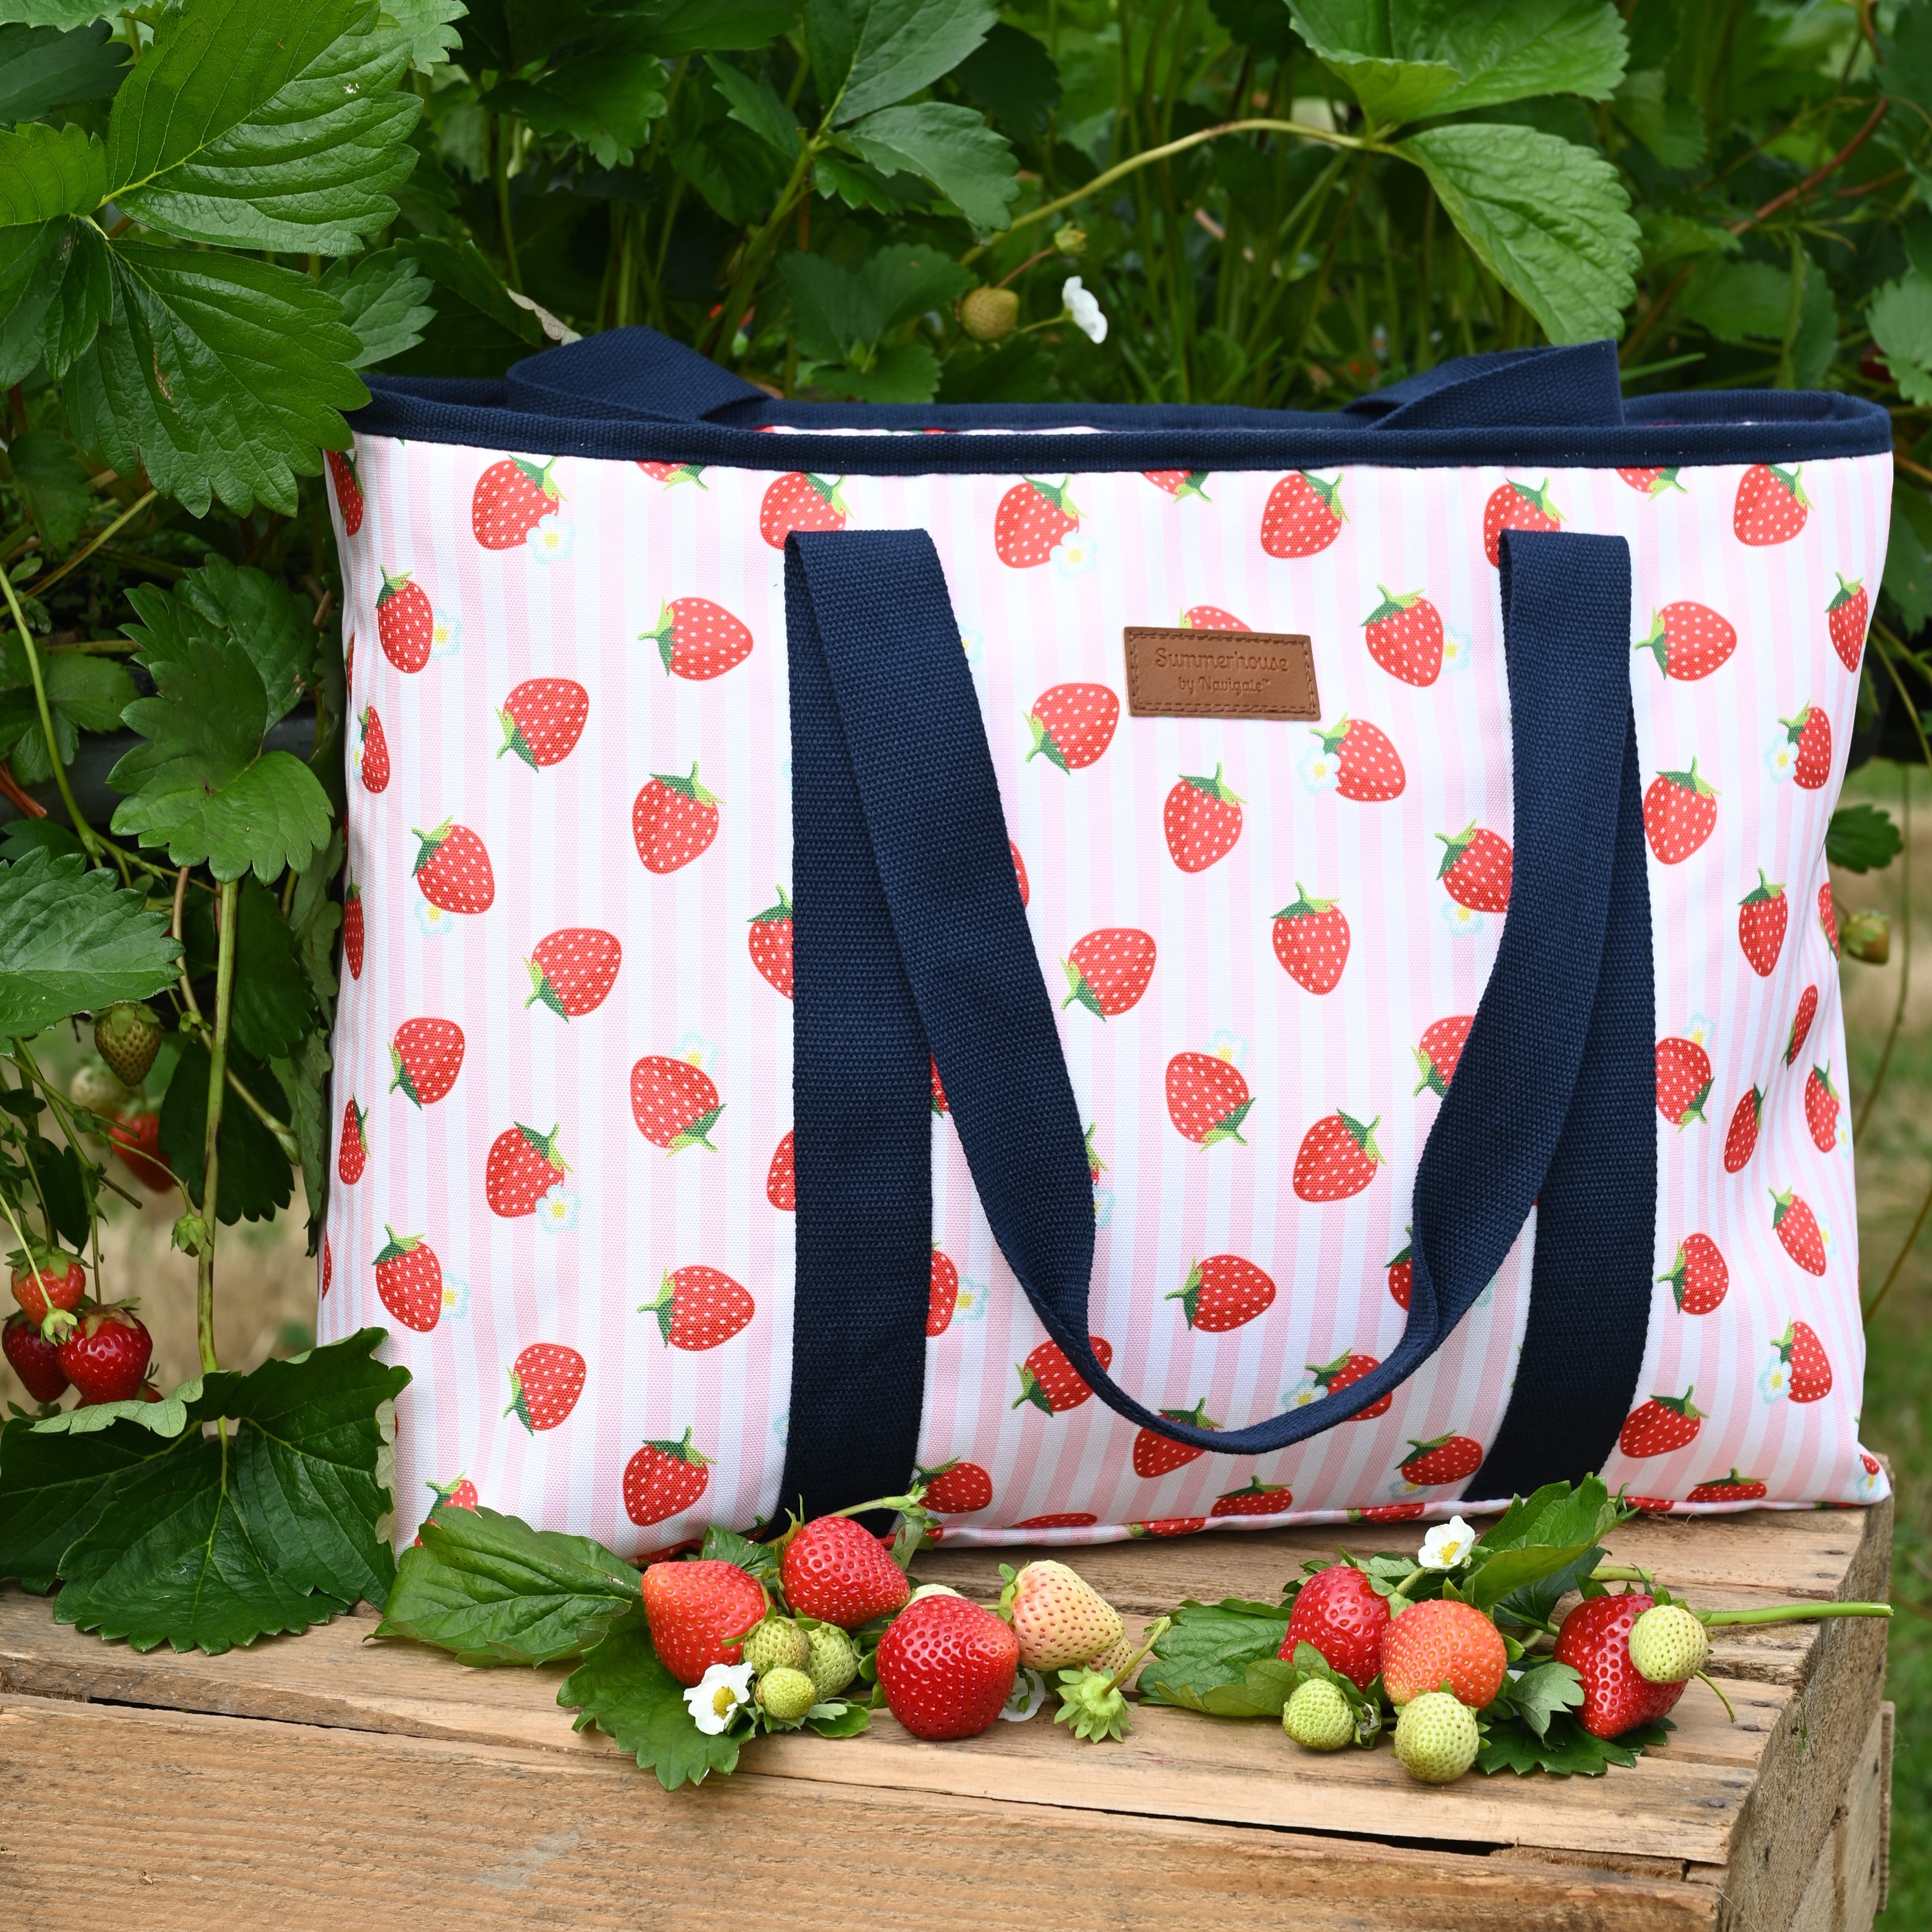 Strawberries & Cream 25 Litre Insulated Family Picnic Tote Bag with Shoulder Strap